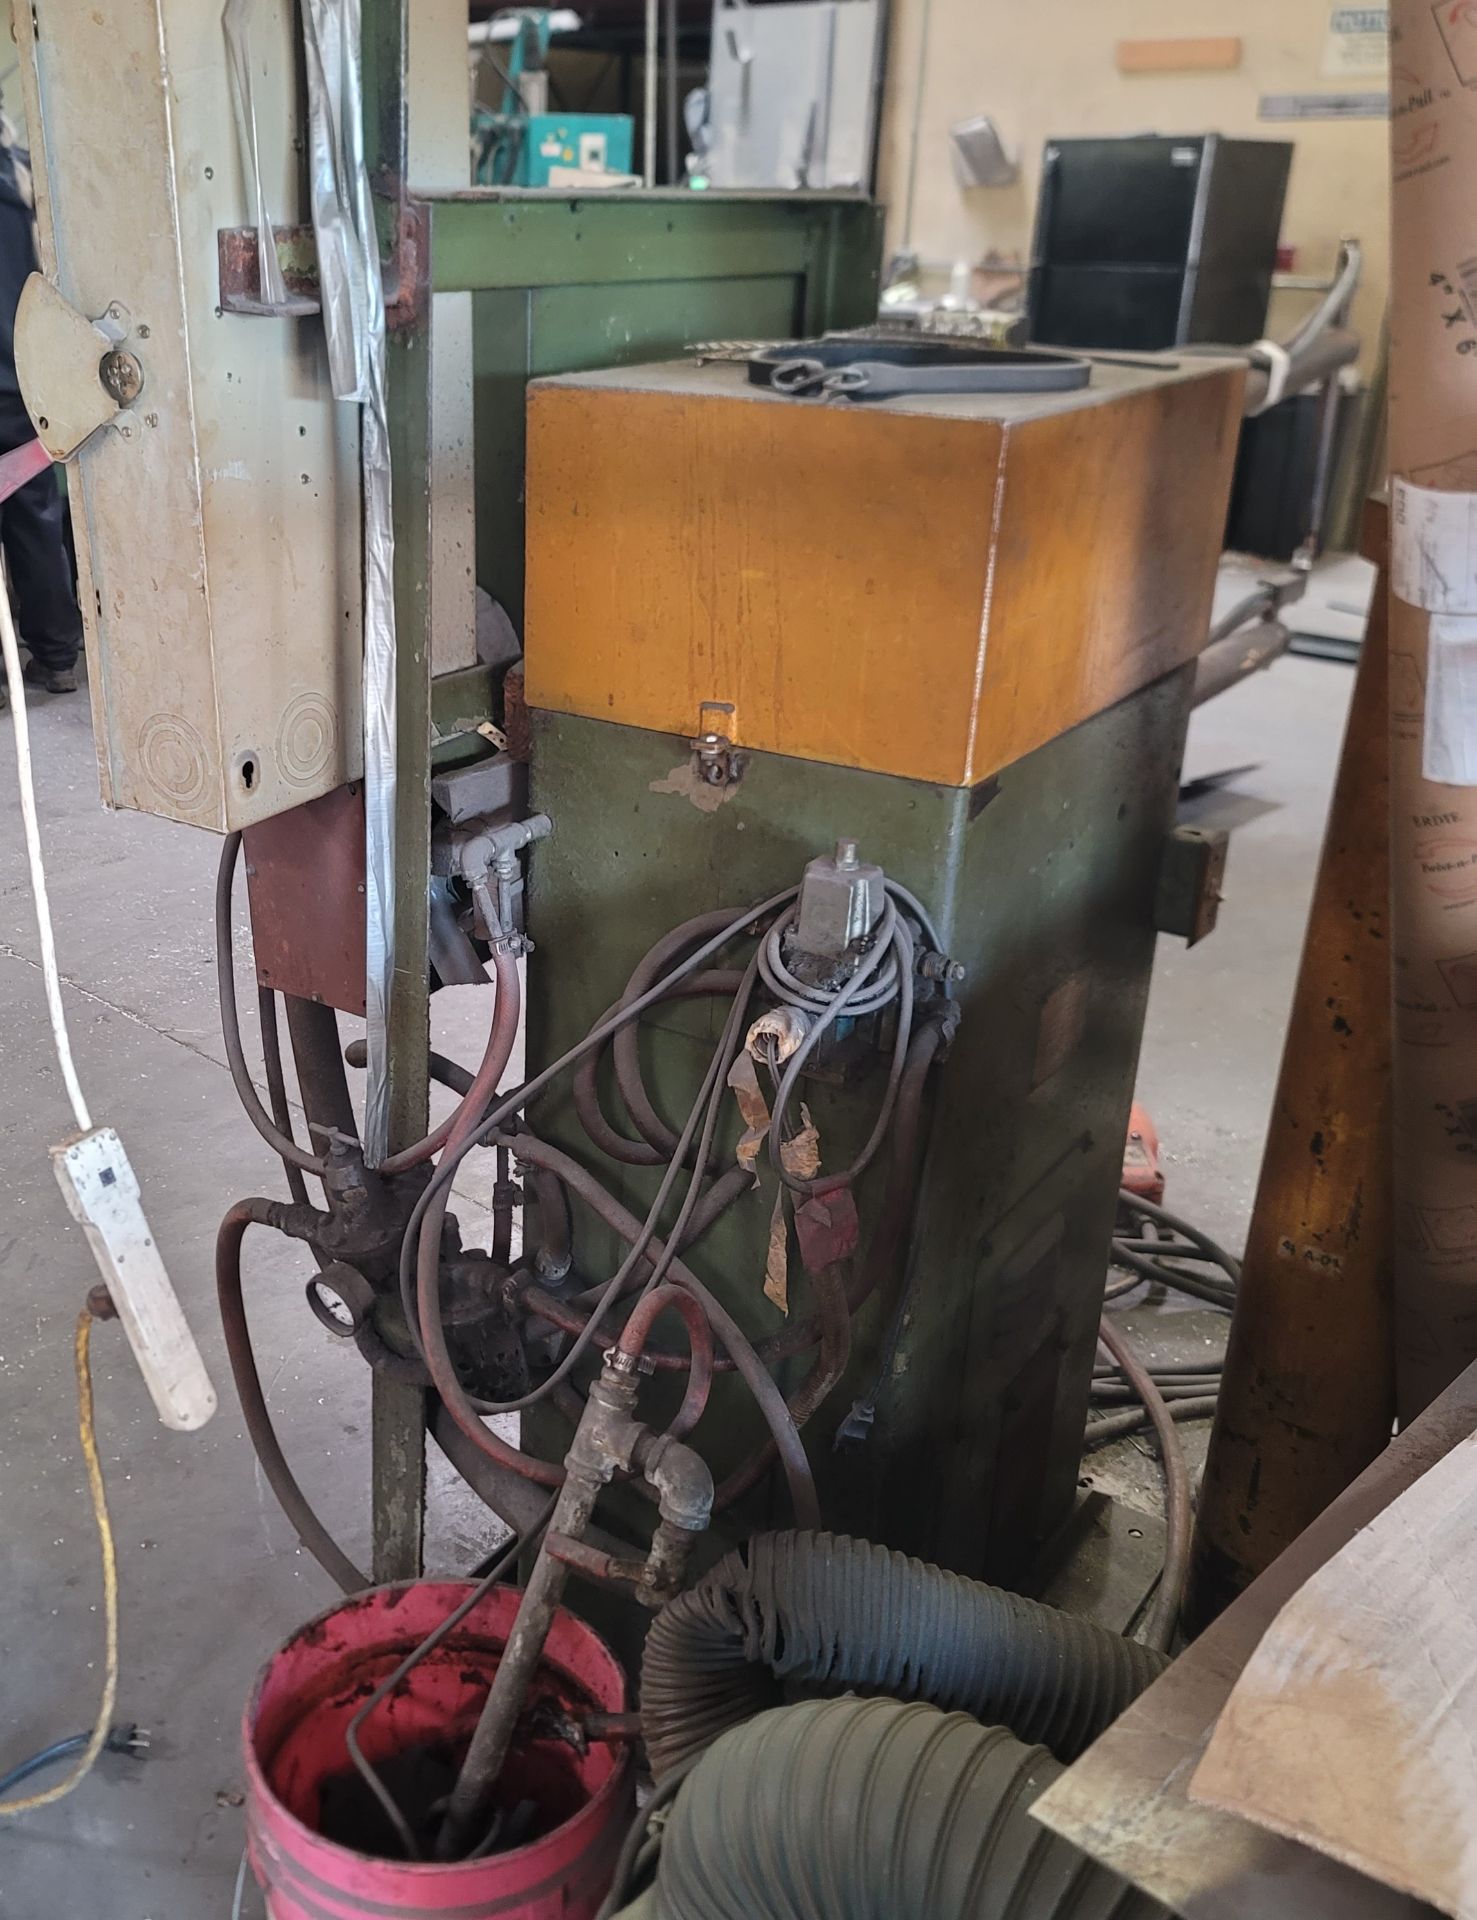 ACME SPOT WELDER, TYPE 3-42-100, STYLE: AR, 100 KVA, 230 VOLTS, 42" THROAT, S/N 11470 - Image 4 of 6